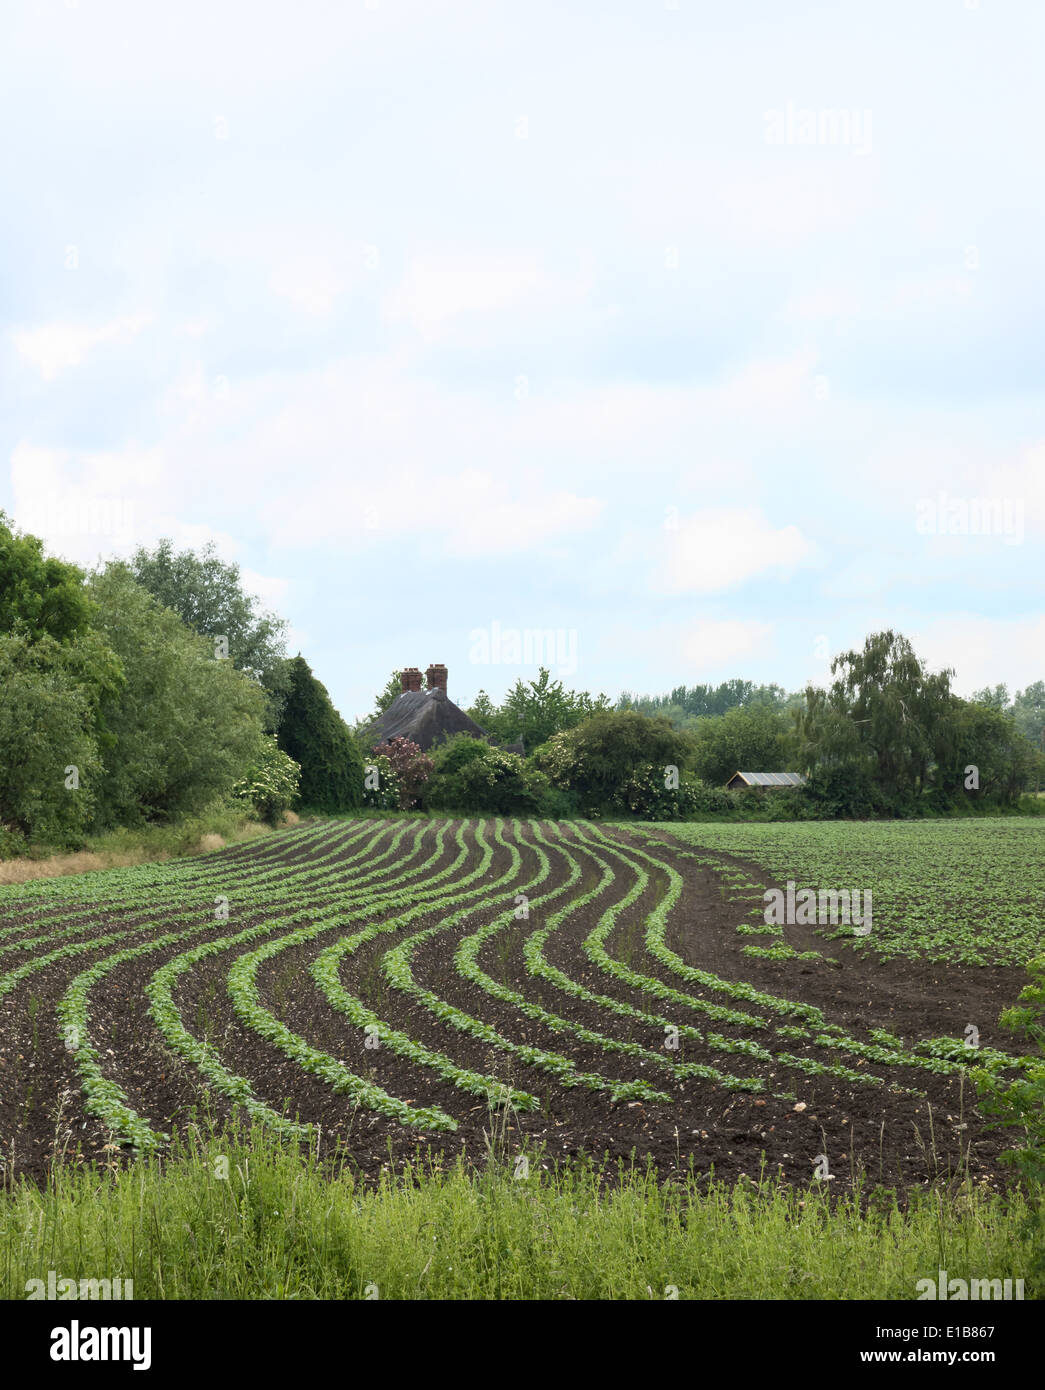 New crop in wavy furrows leading to thatched cottages Stock Photo